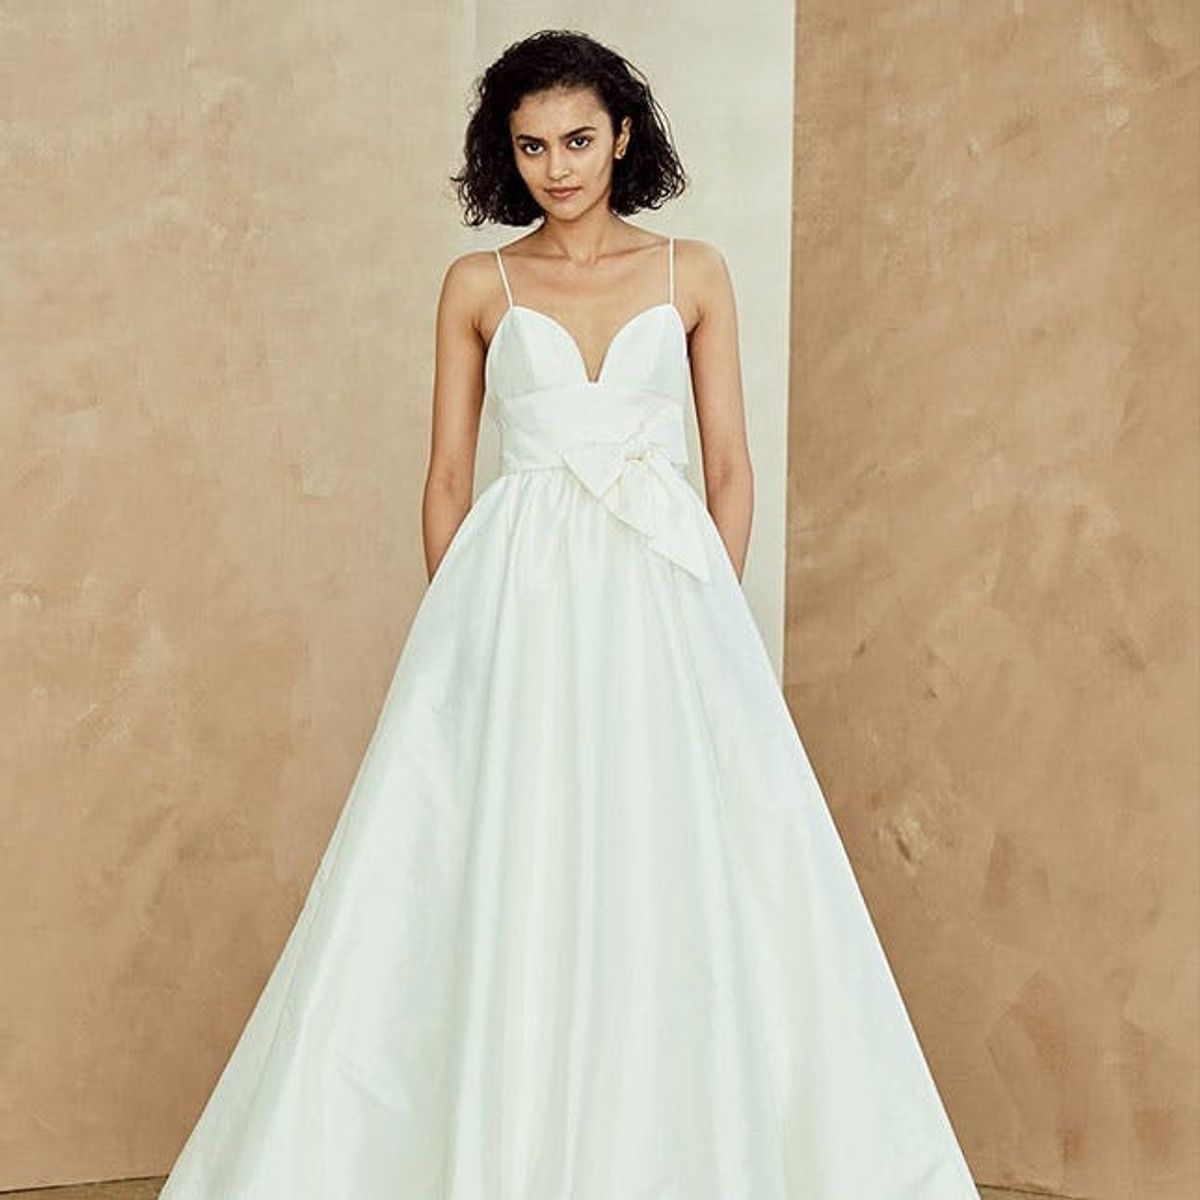 12 Wedding Dresses With Pockets That Are Anything But Bulky